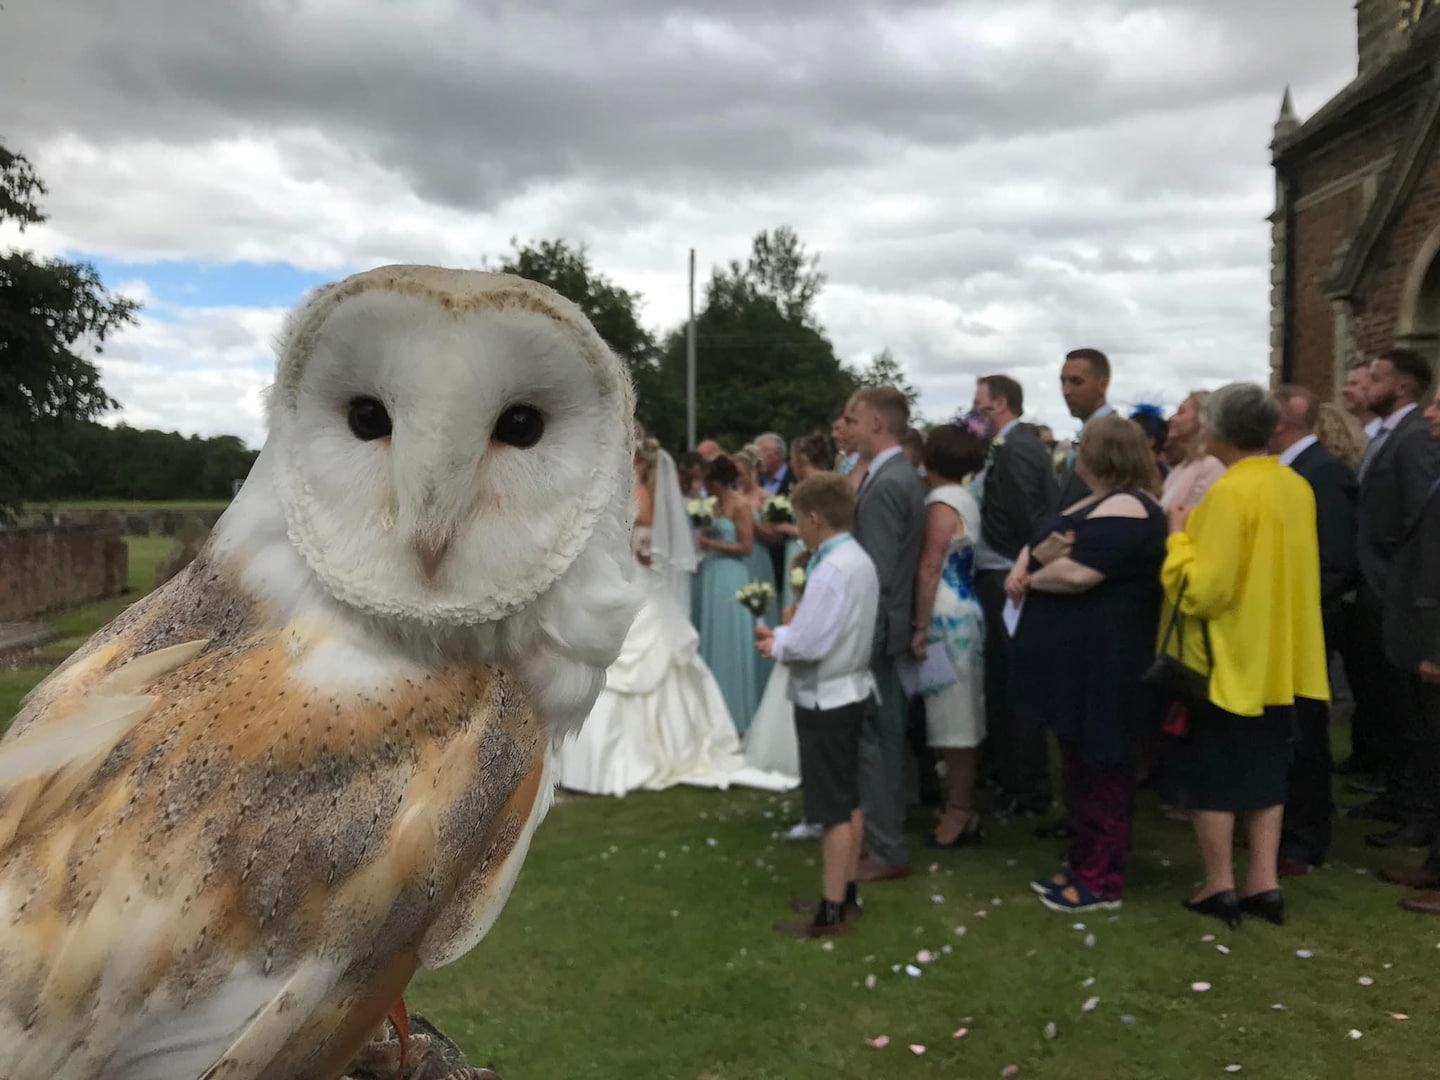 A UK falconer trains owls to deliver rings at wedding ceremonies